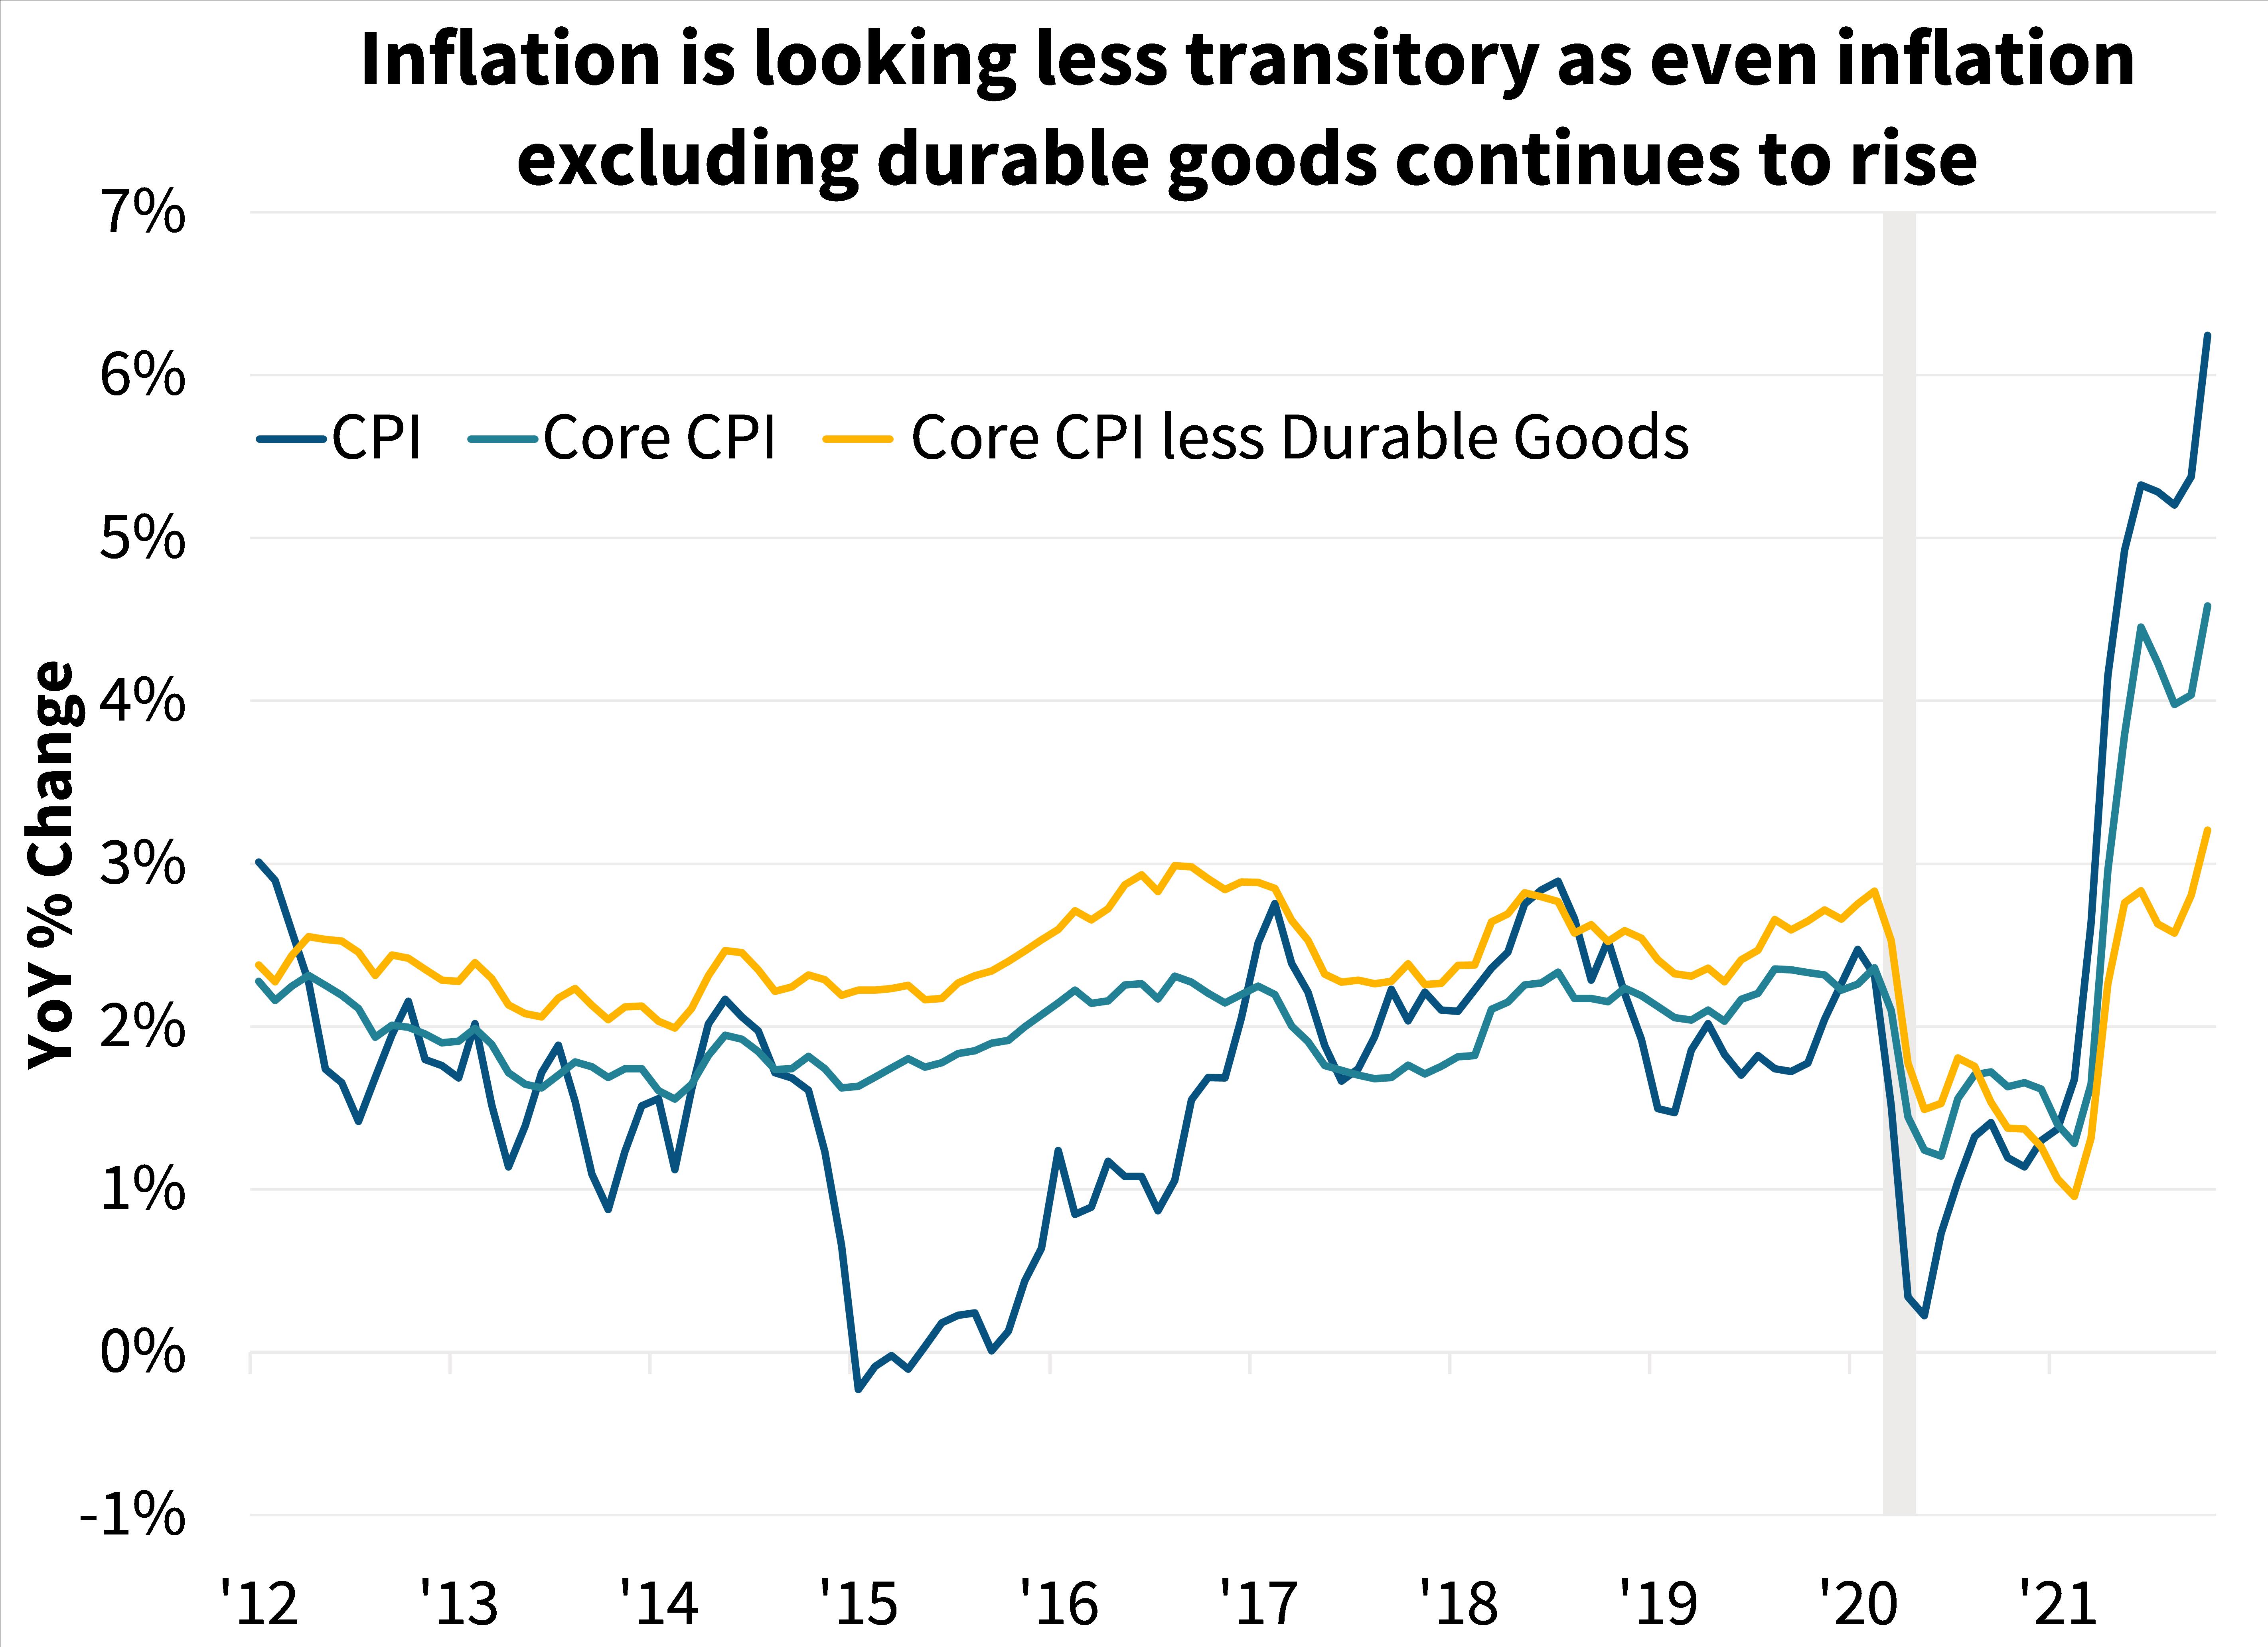  Inflation is looking less transitory as even inflation excluding durable goods continues to rise